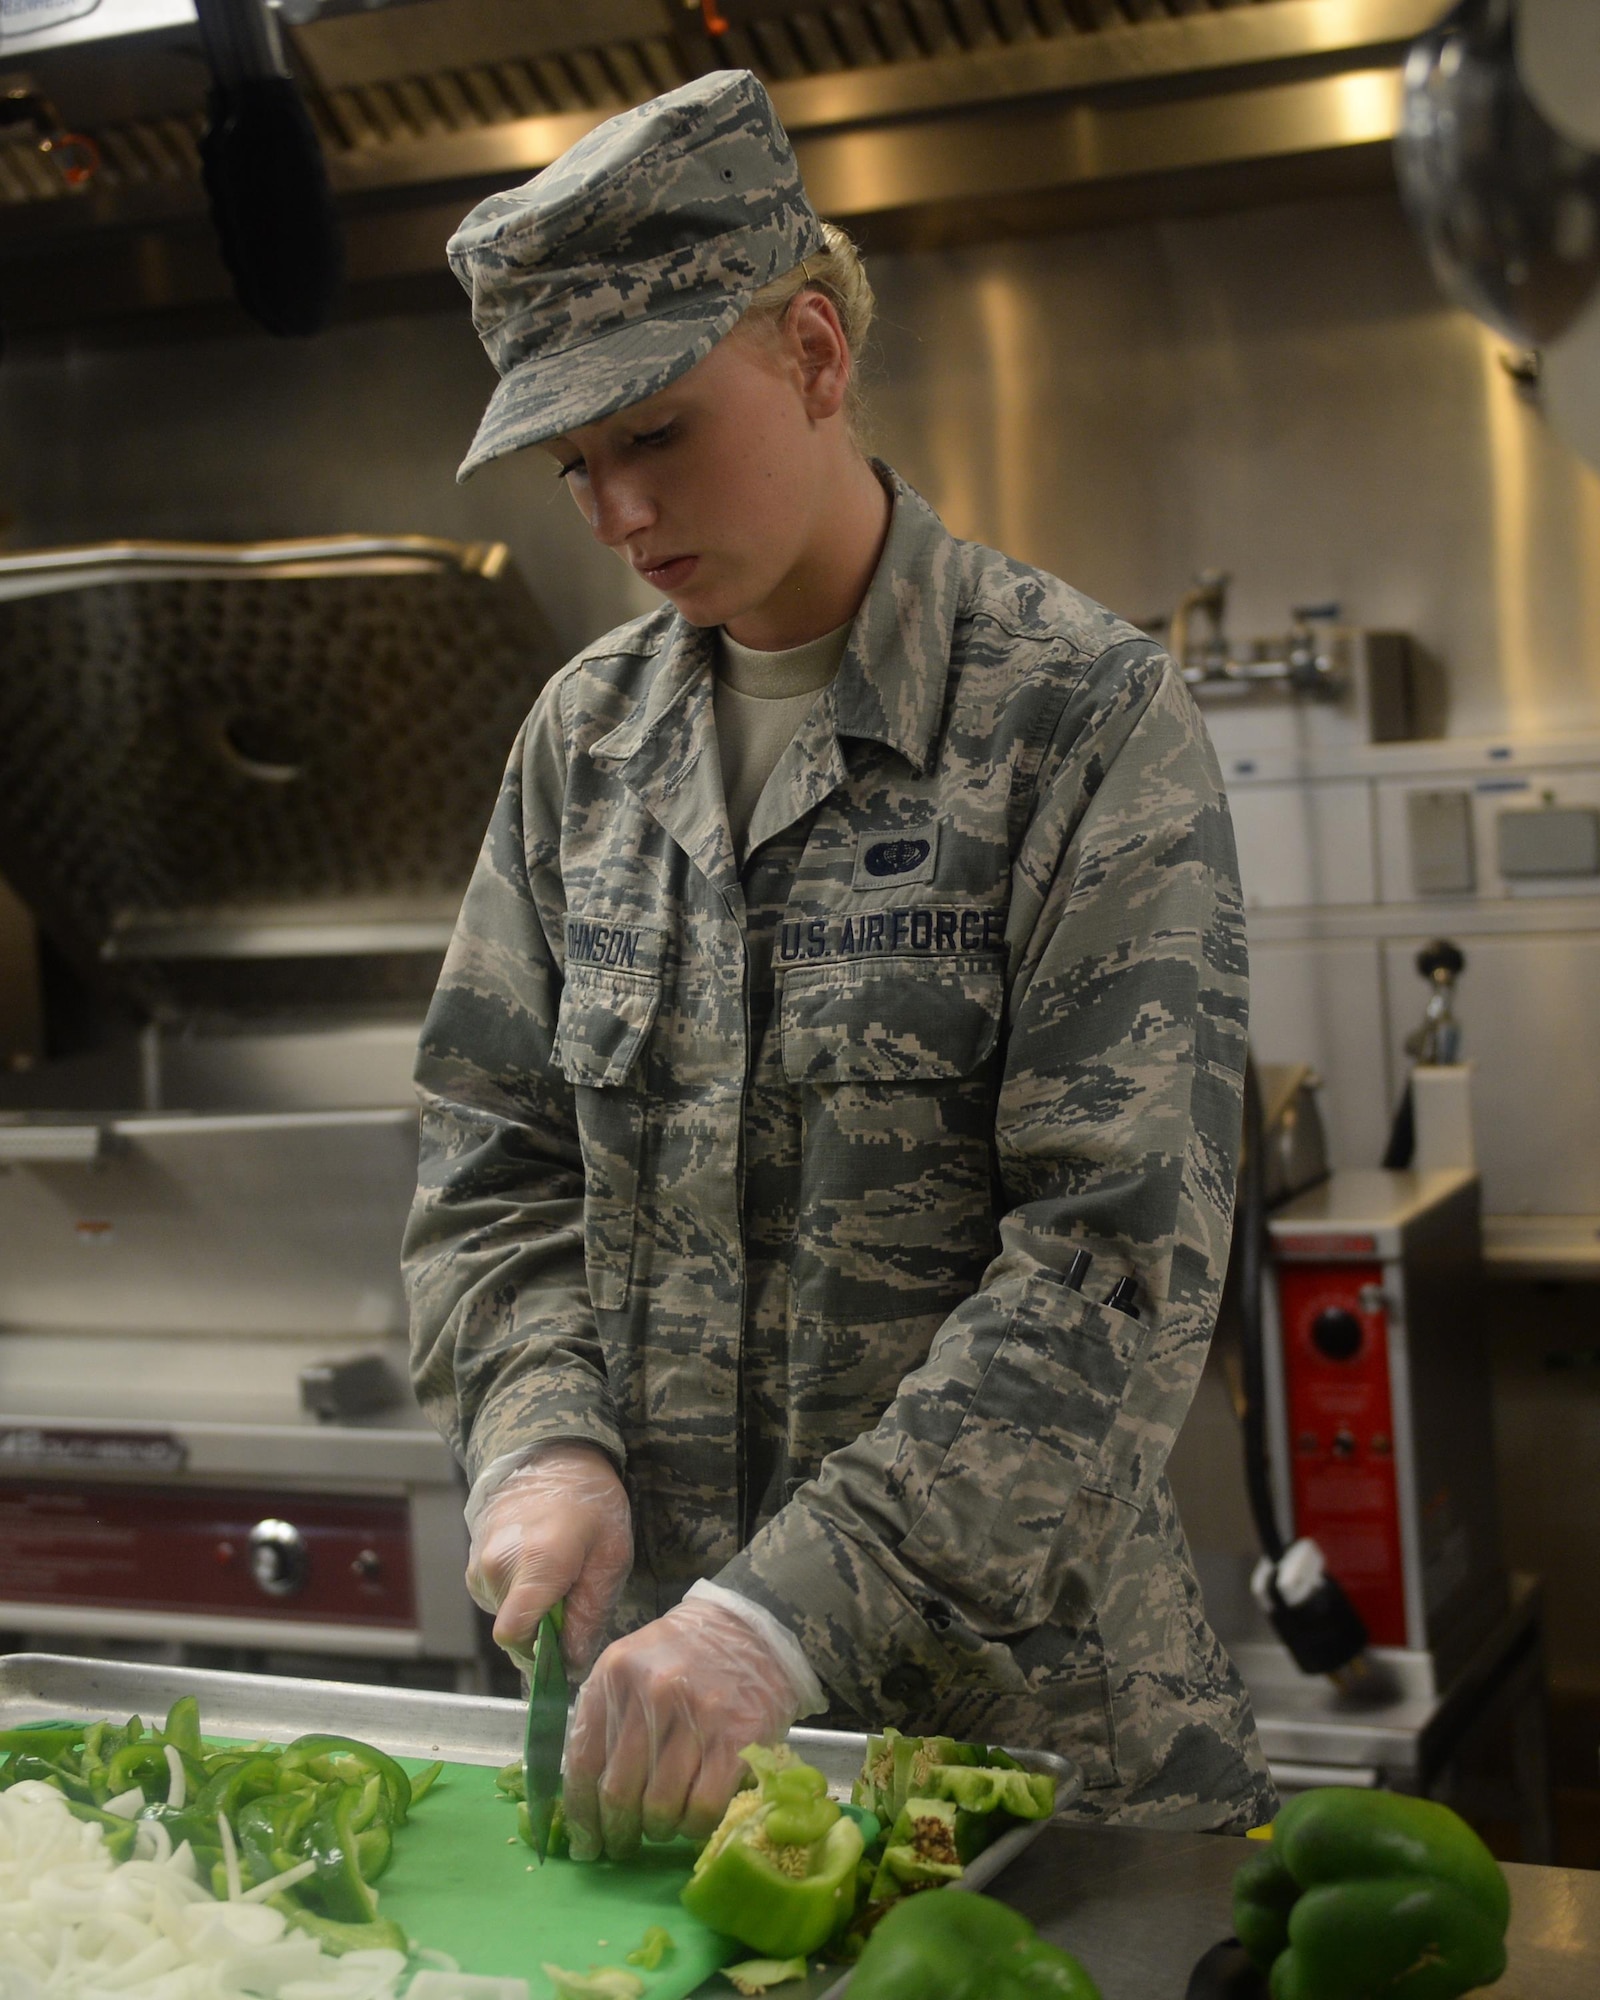 Airman Basic Carli Johnson, 325th Force Support Squadron Berg-Liles Dining Facility chef, chops bell peppers in preparation for a meal at Tyndall Air Force Base, May 17. Food service specialist like Johnson are trained to be knowledgeable in functions such as preparing, cooking, baking, presenting, and serving food. (U.S. Air Force photo by Airman 1st Class Cody R. Miller/Released)